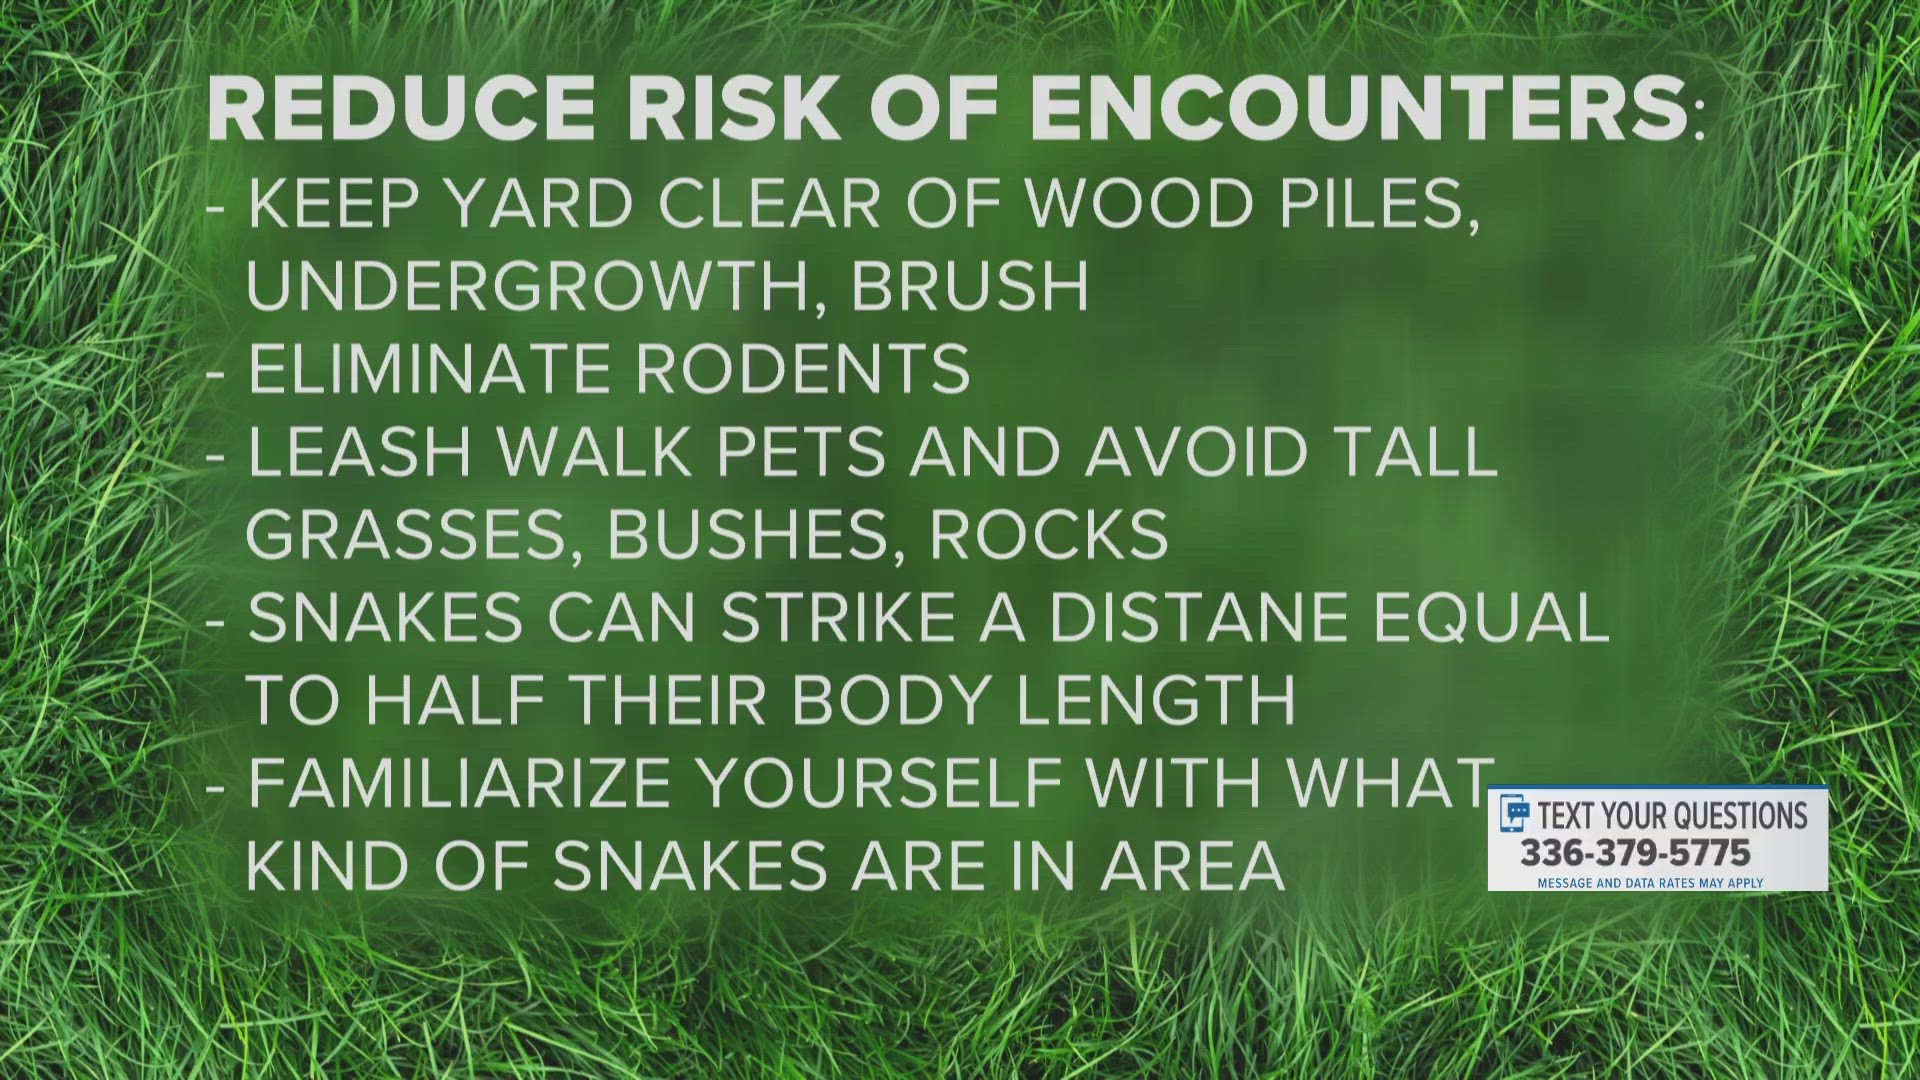 Snake bites occur most often between March and October when snakes are most active.